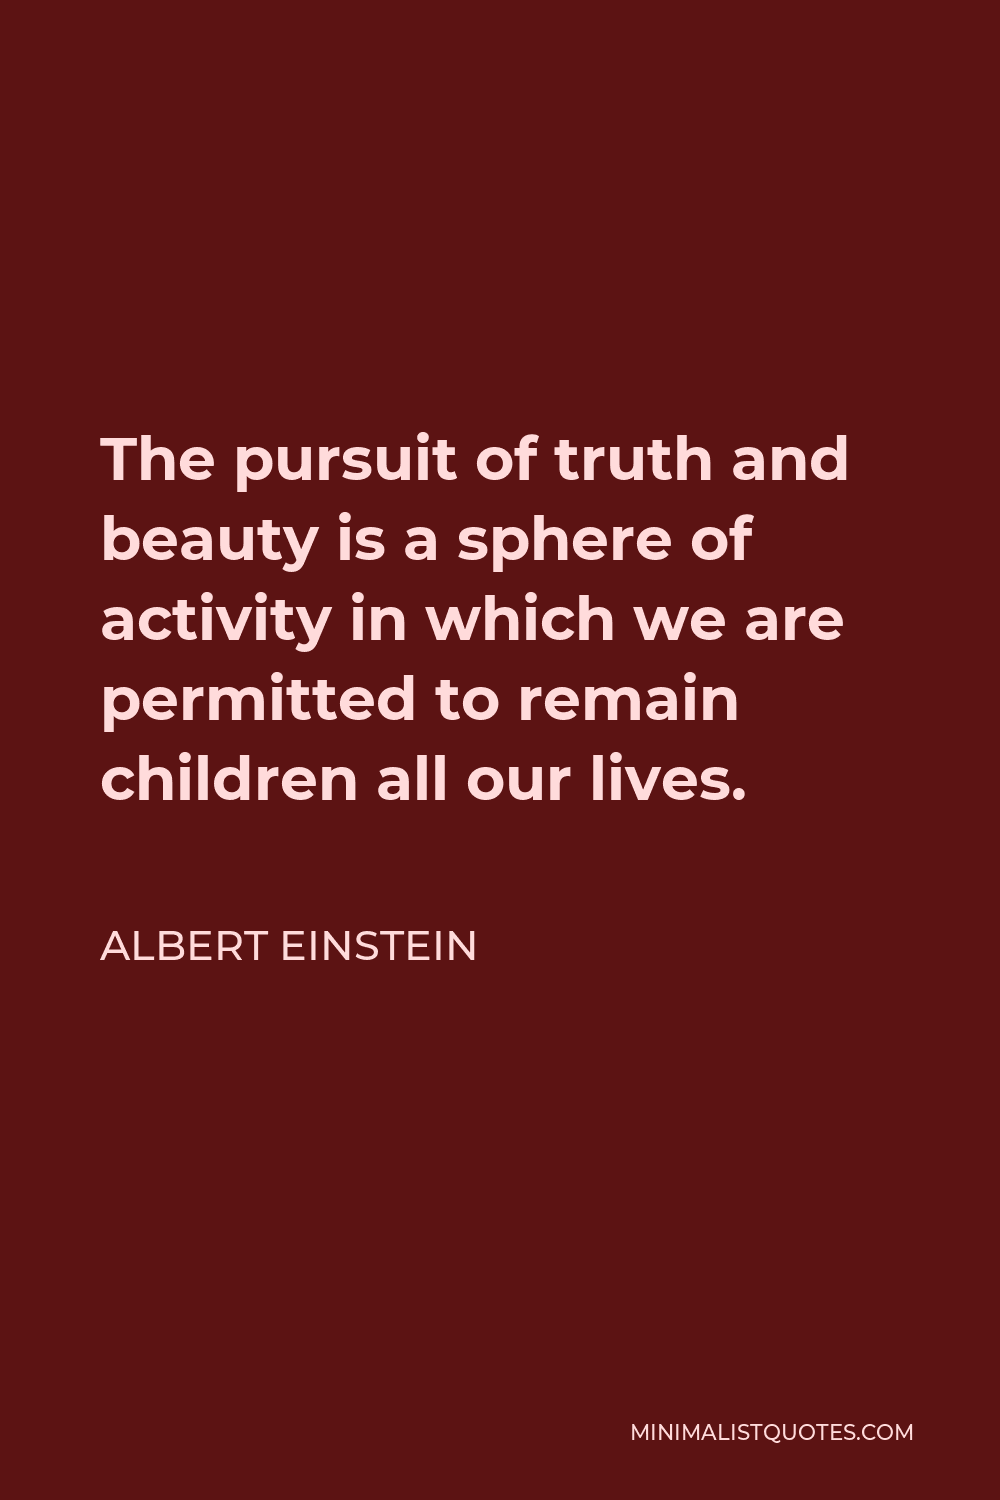 Albert Einstein Quote - The pursuit of truth and beauty is a sphere of activity in which we are permitted to remain children all our lives.